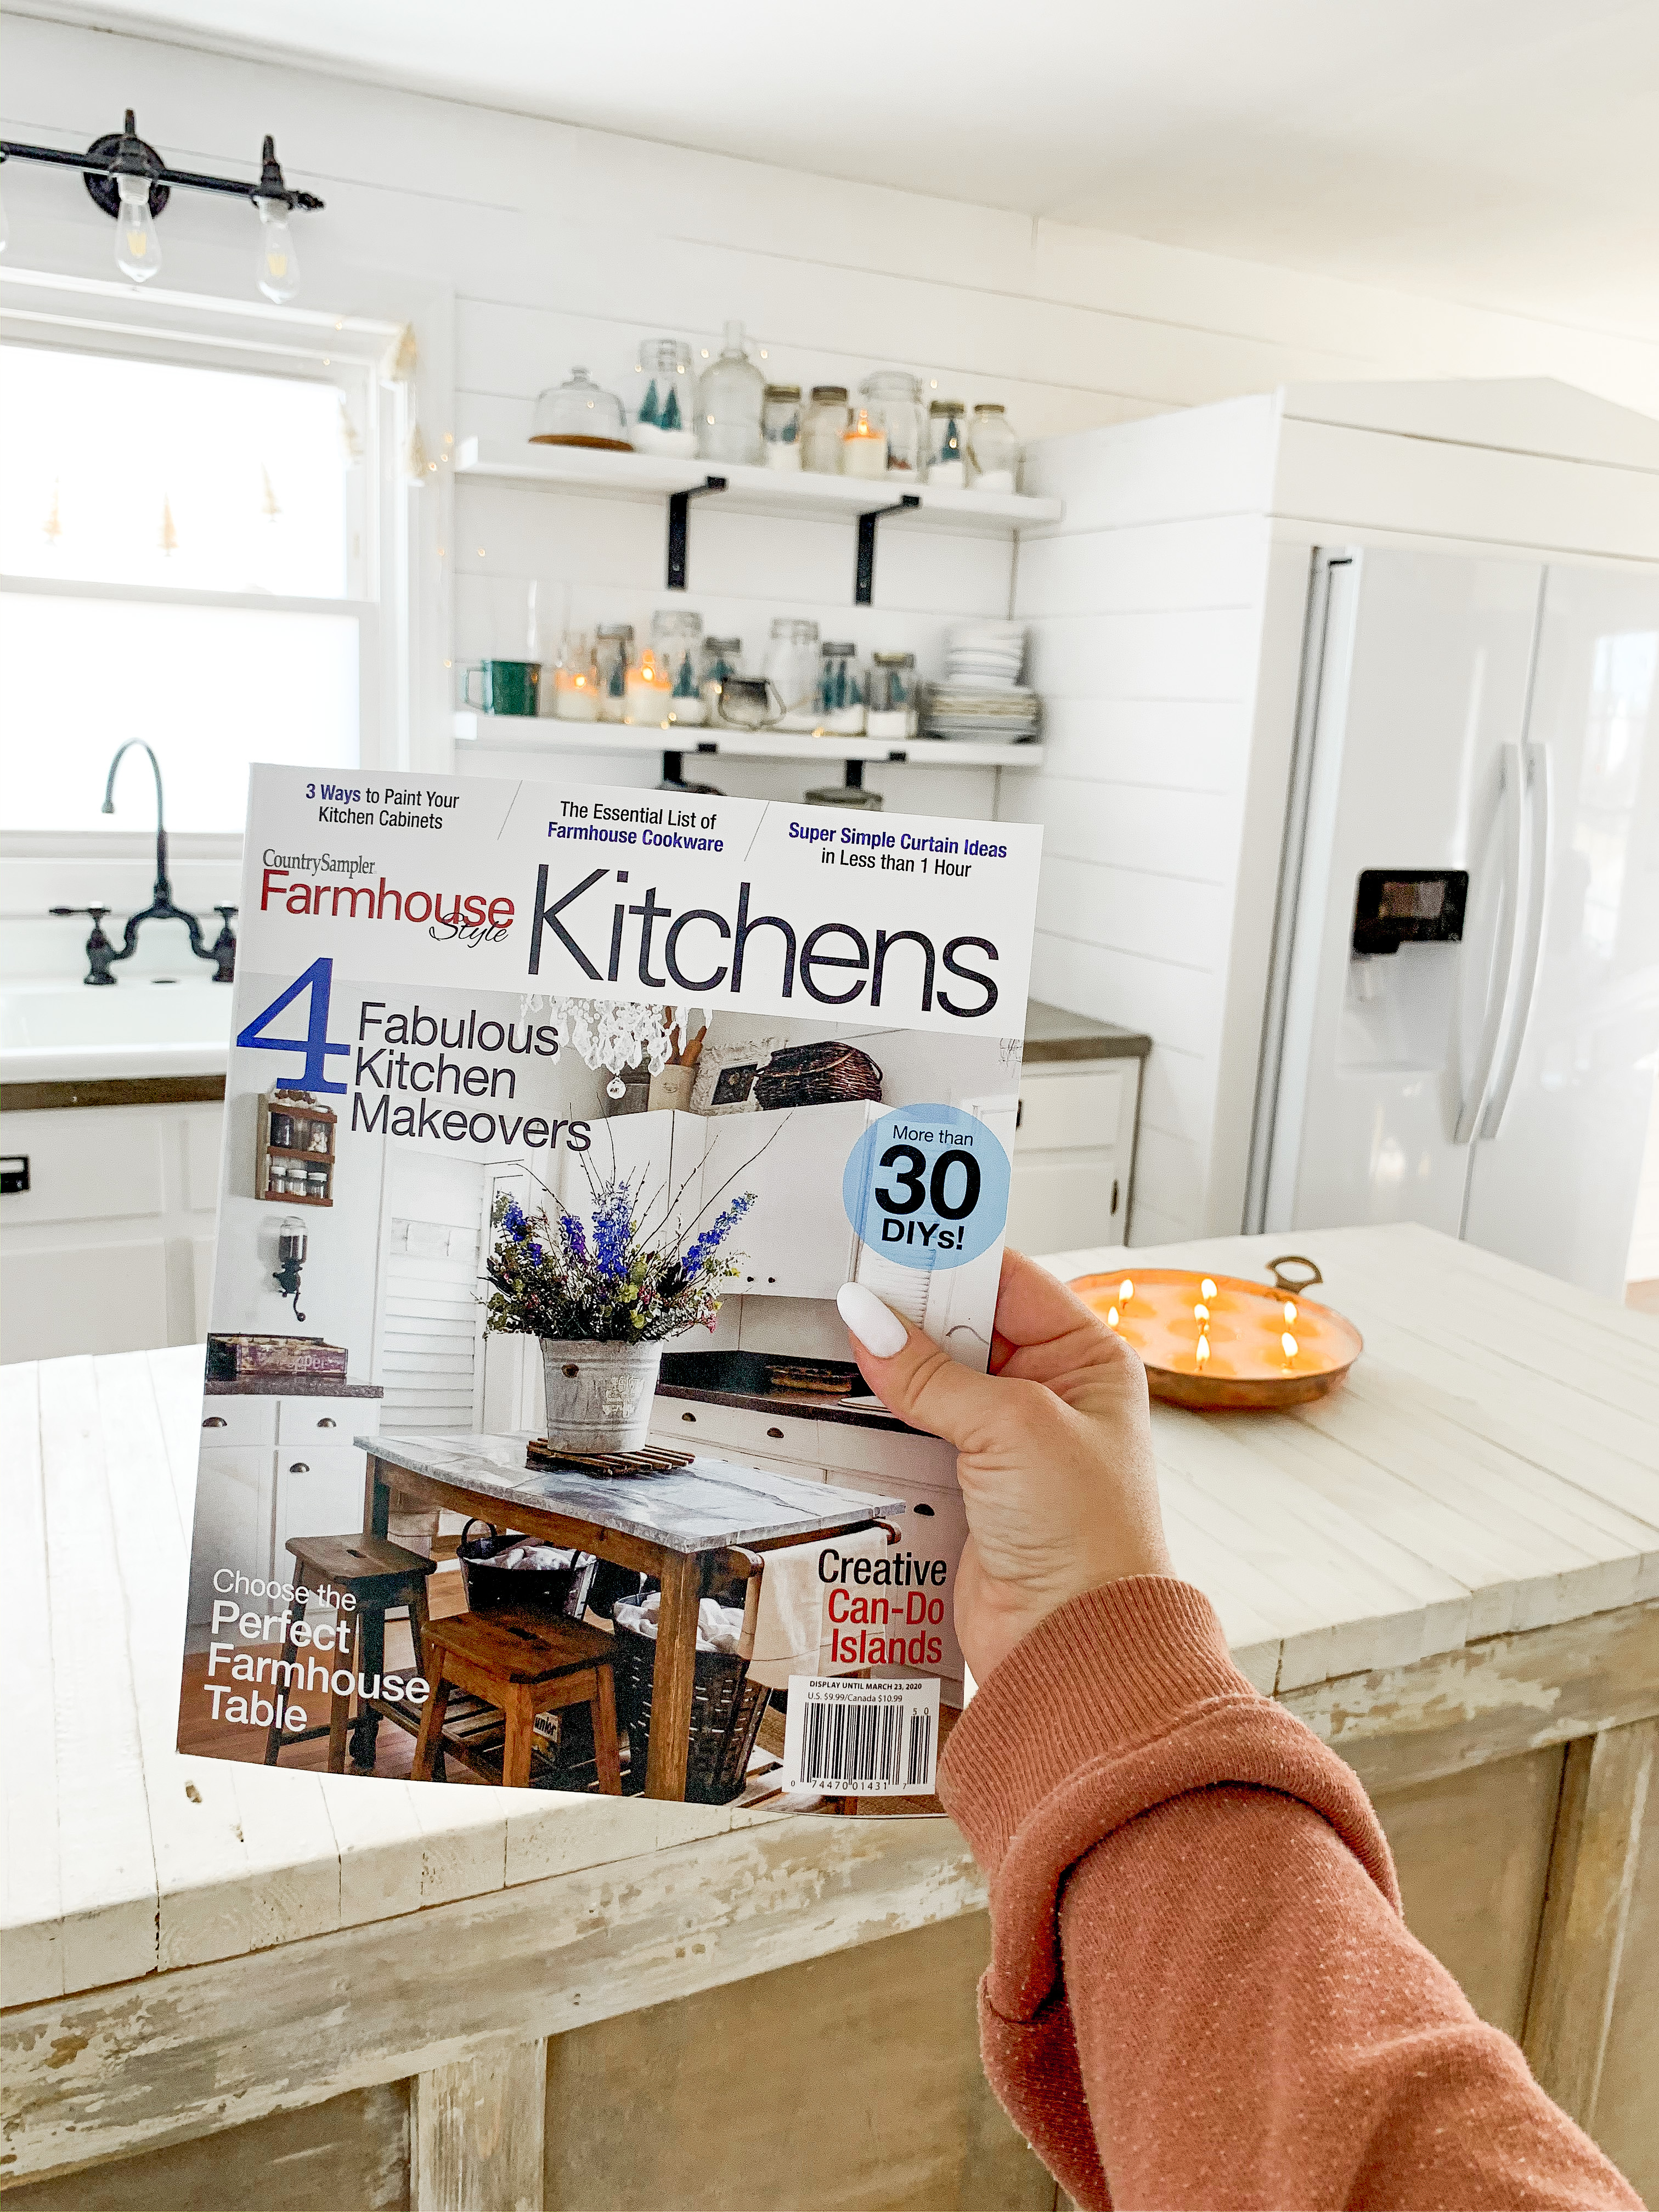 My First Printed Magazine Feature- My House Is In The Country Sampler Farmhouse Style Kitchen Edition!